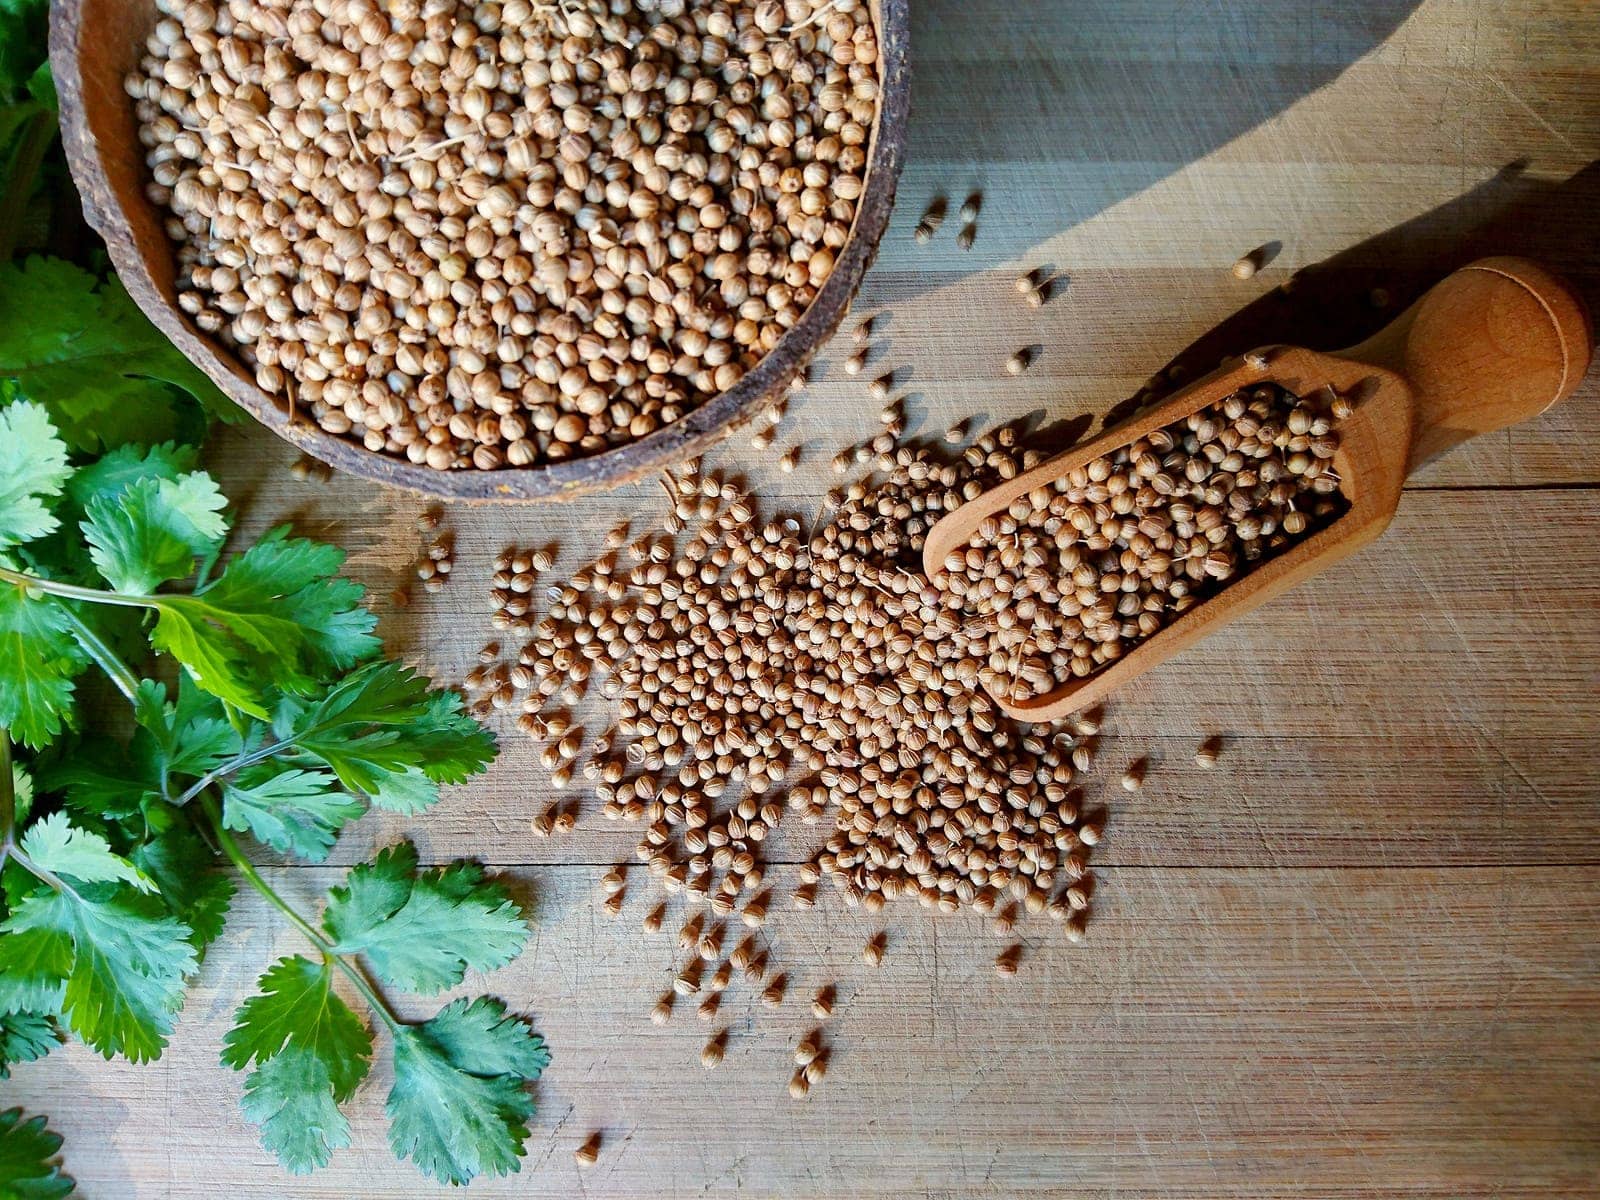 Coriander seeds and fresh green cilantro leaves on wooden background